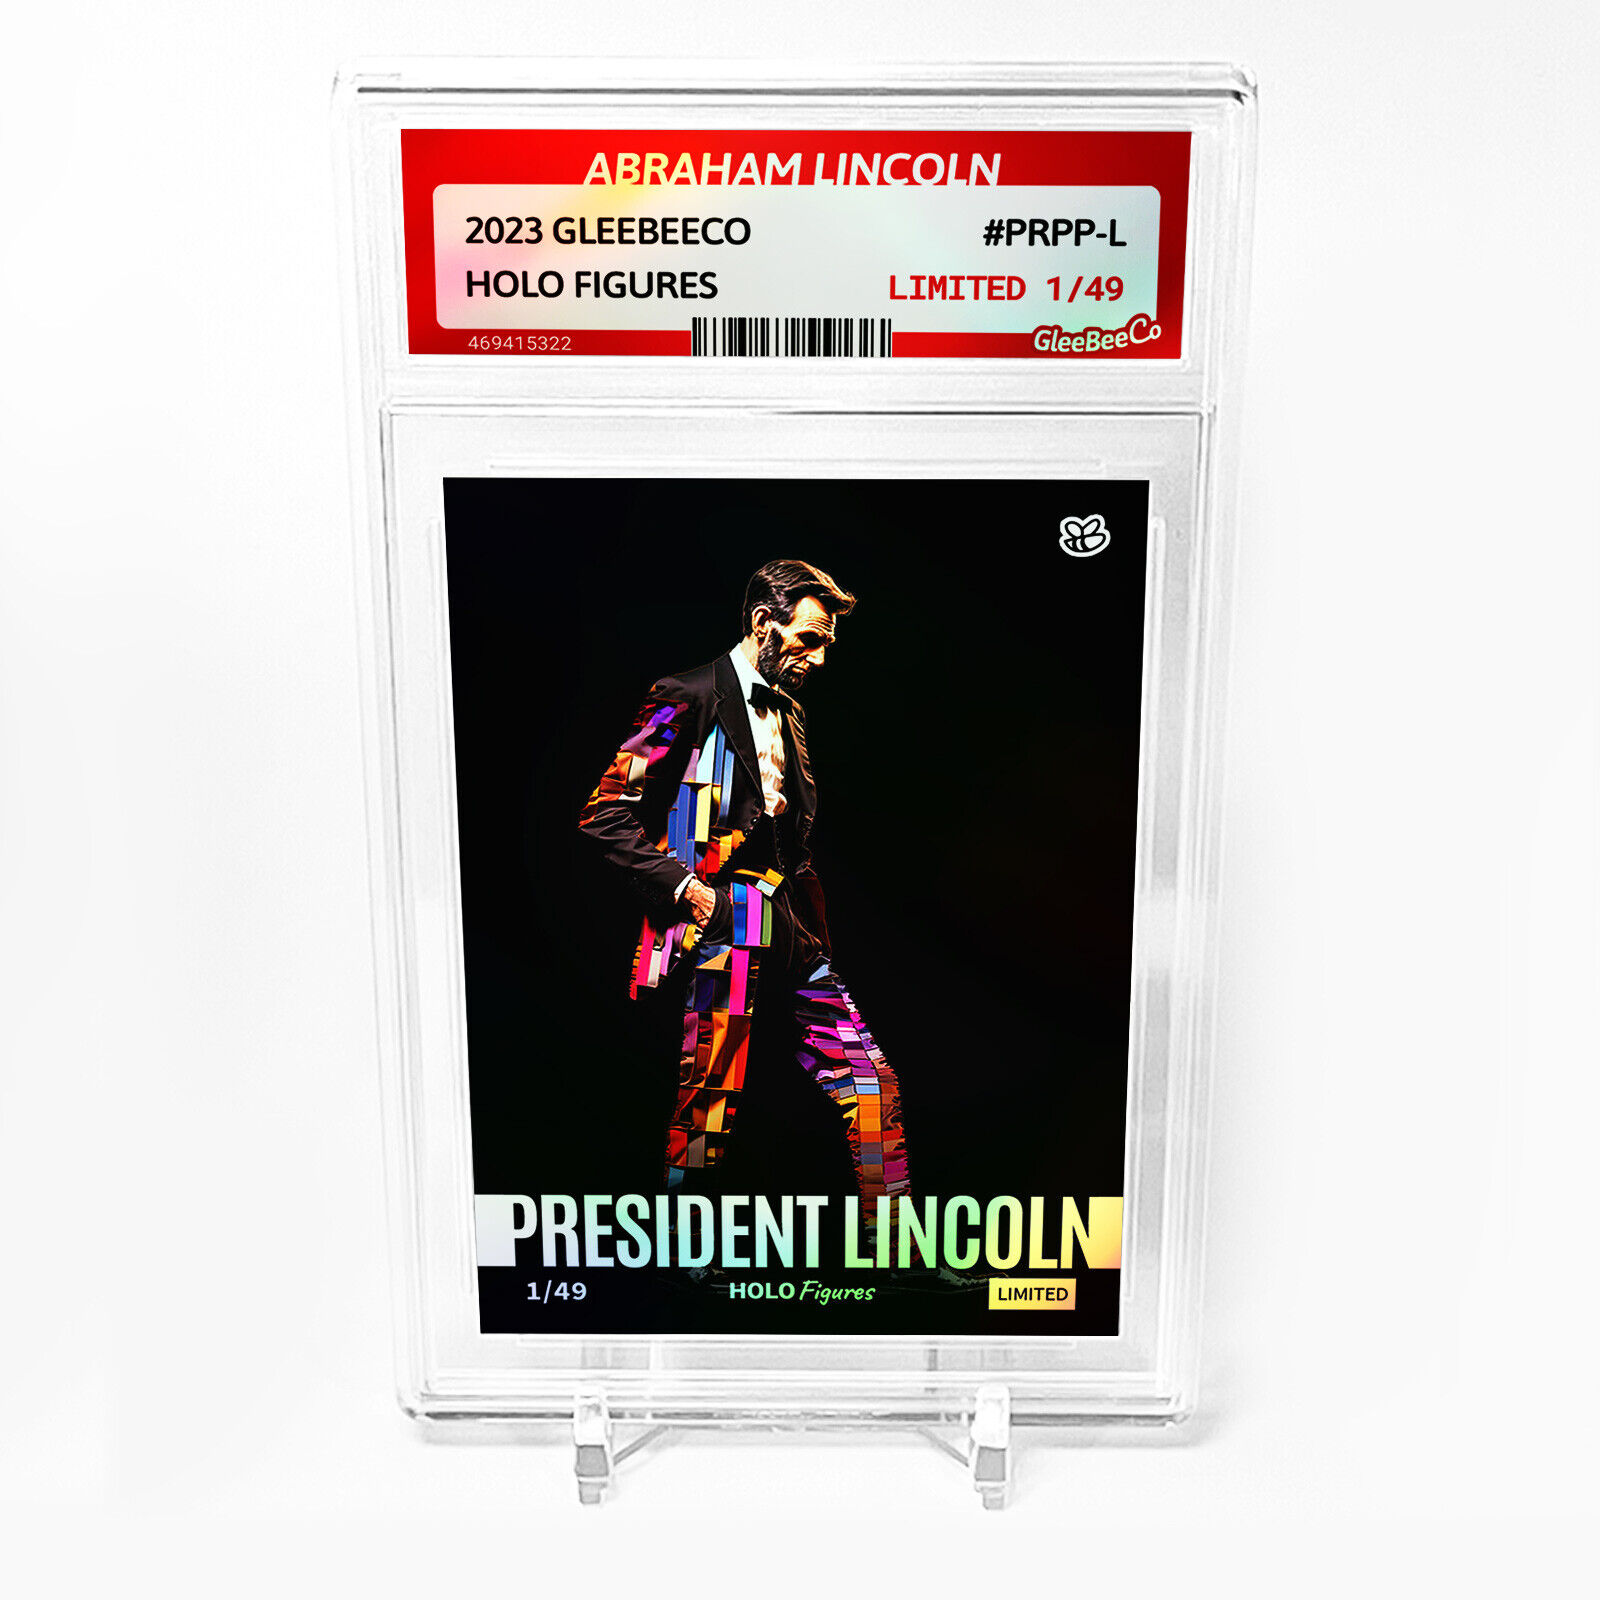 PRESIDENT LINCOLN Holographic Card 2023 GleeBeeCo Slabbed #PRPP-L Only /49